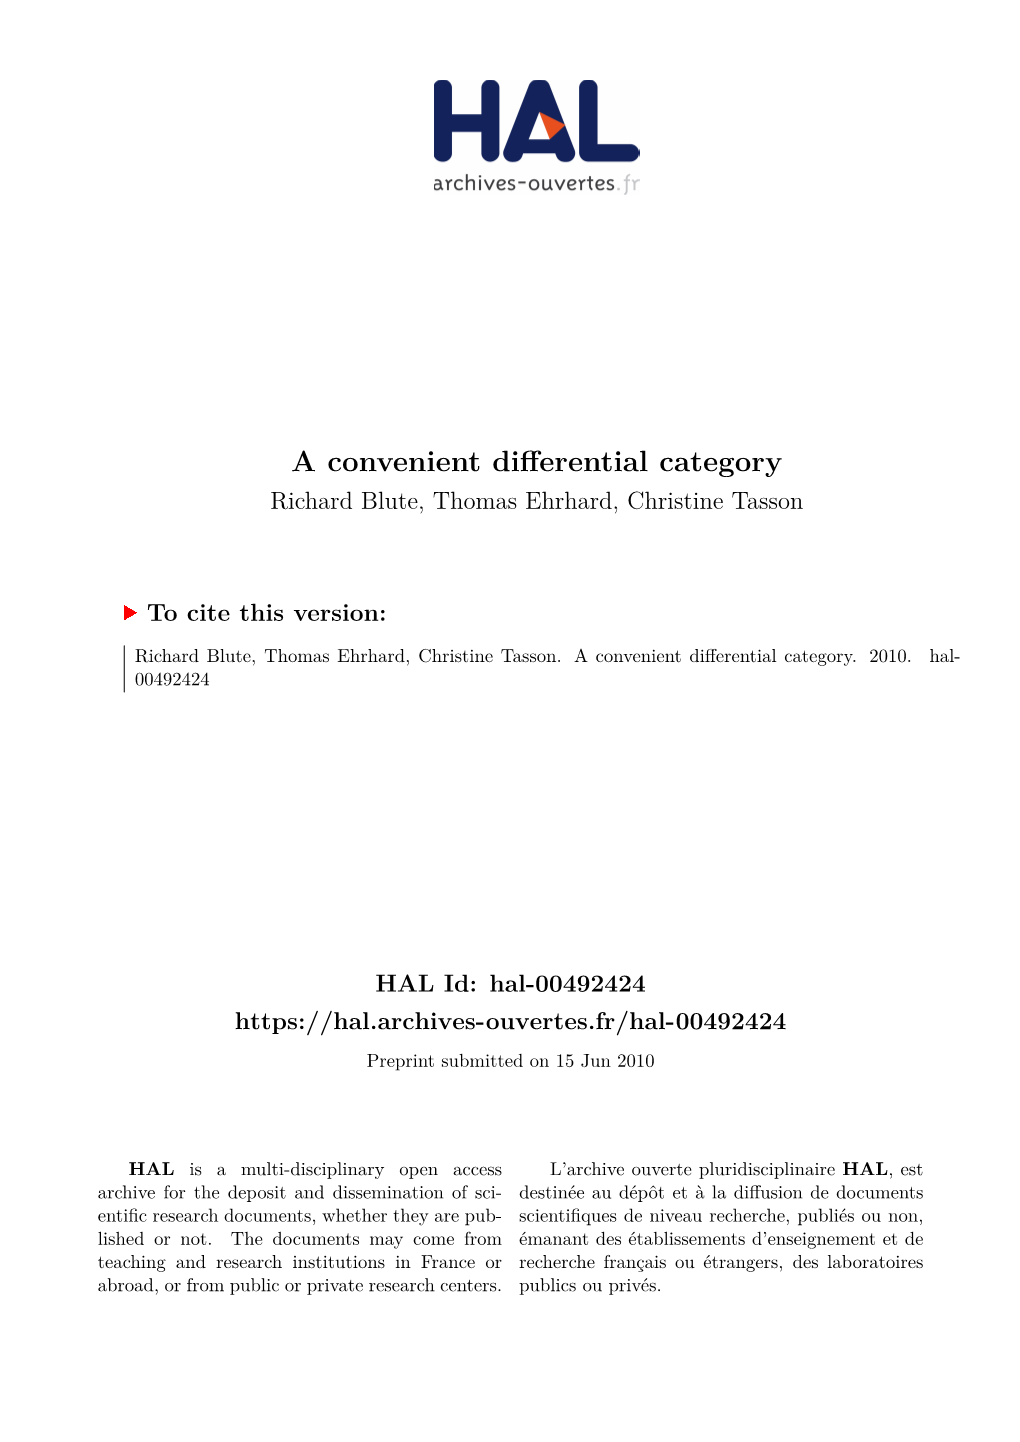 A Convenient Differential Category Richard Blute, Thomas Ehrhard, Christine Tasson